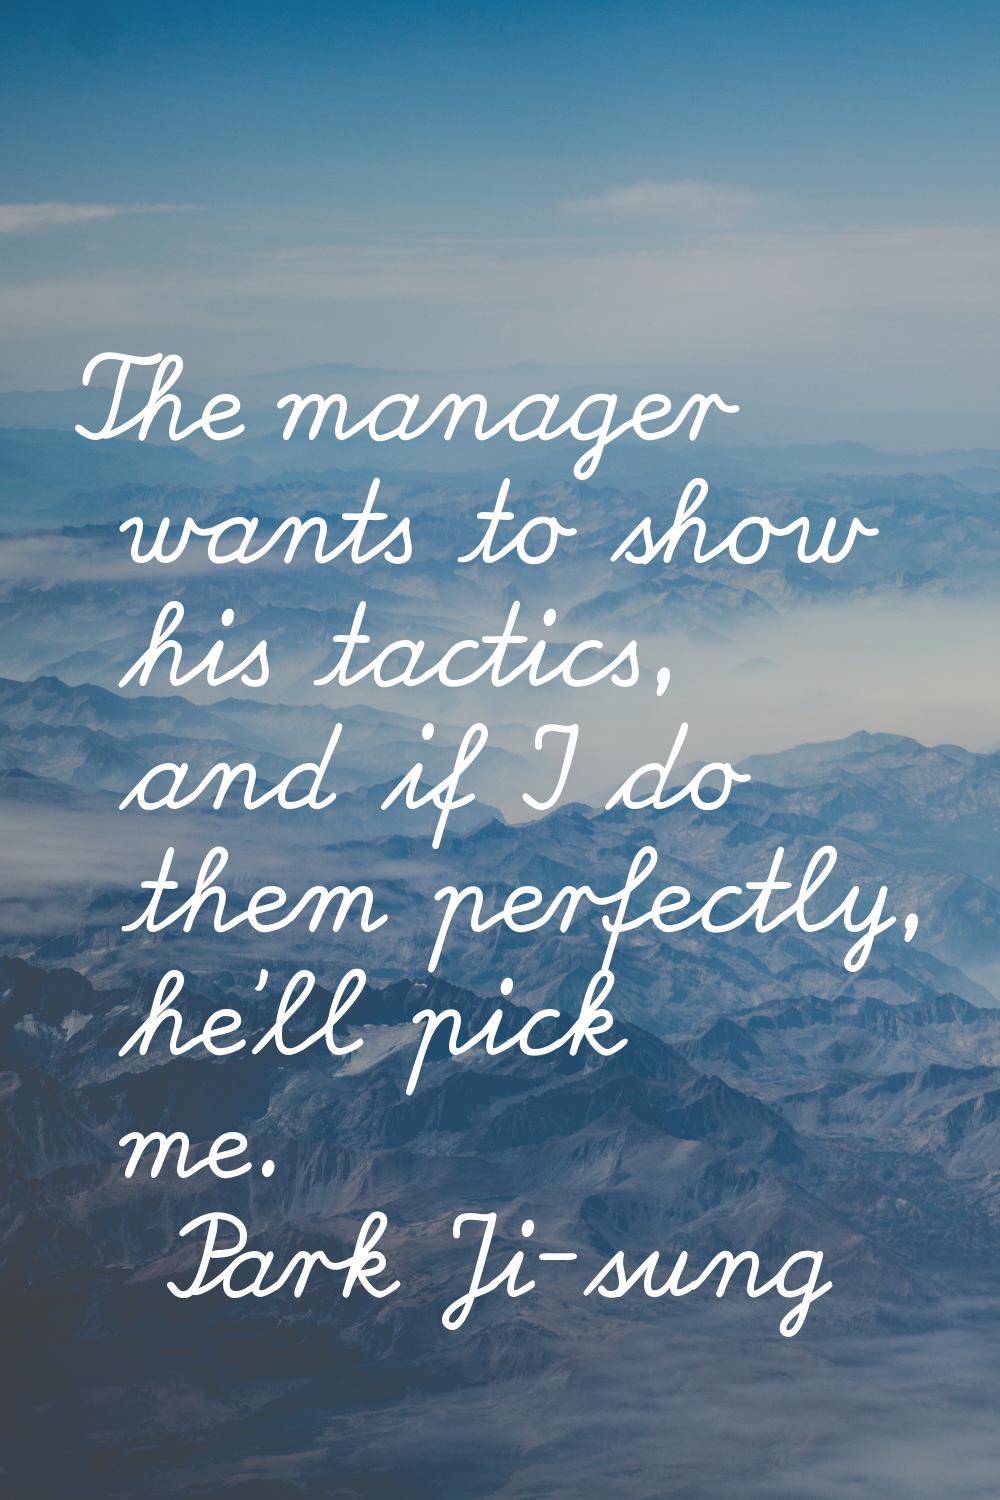 The manager wants to show his tactics, and if I do them perfectly, he'll pick me.